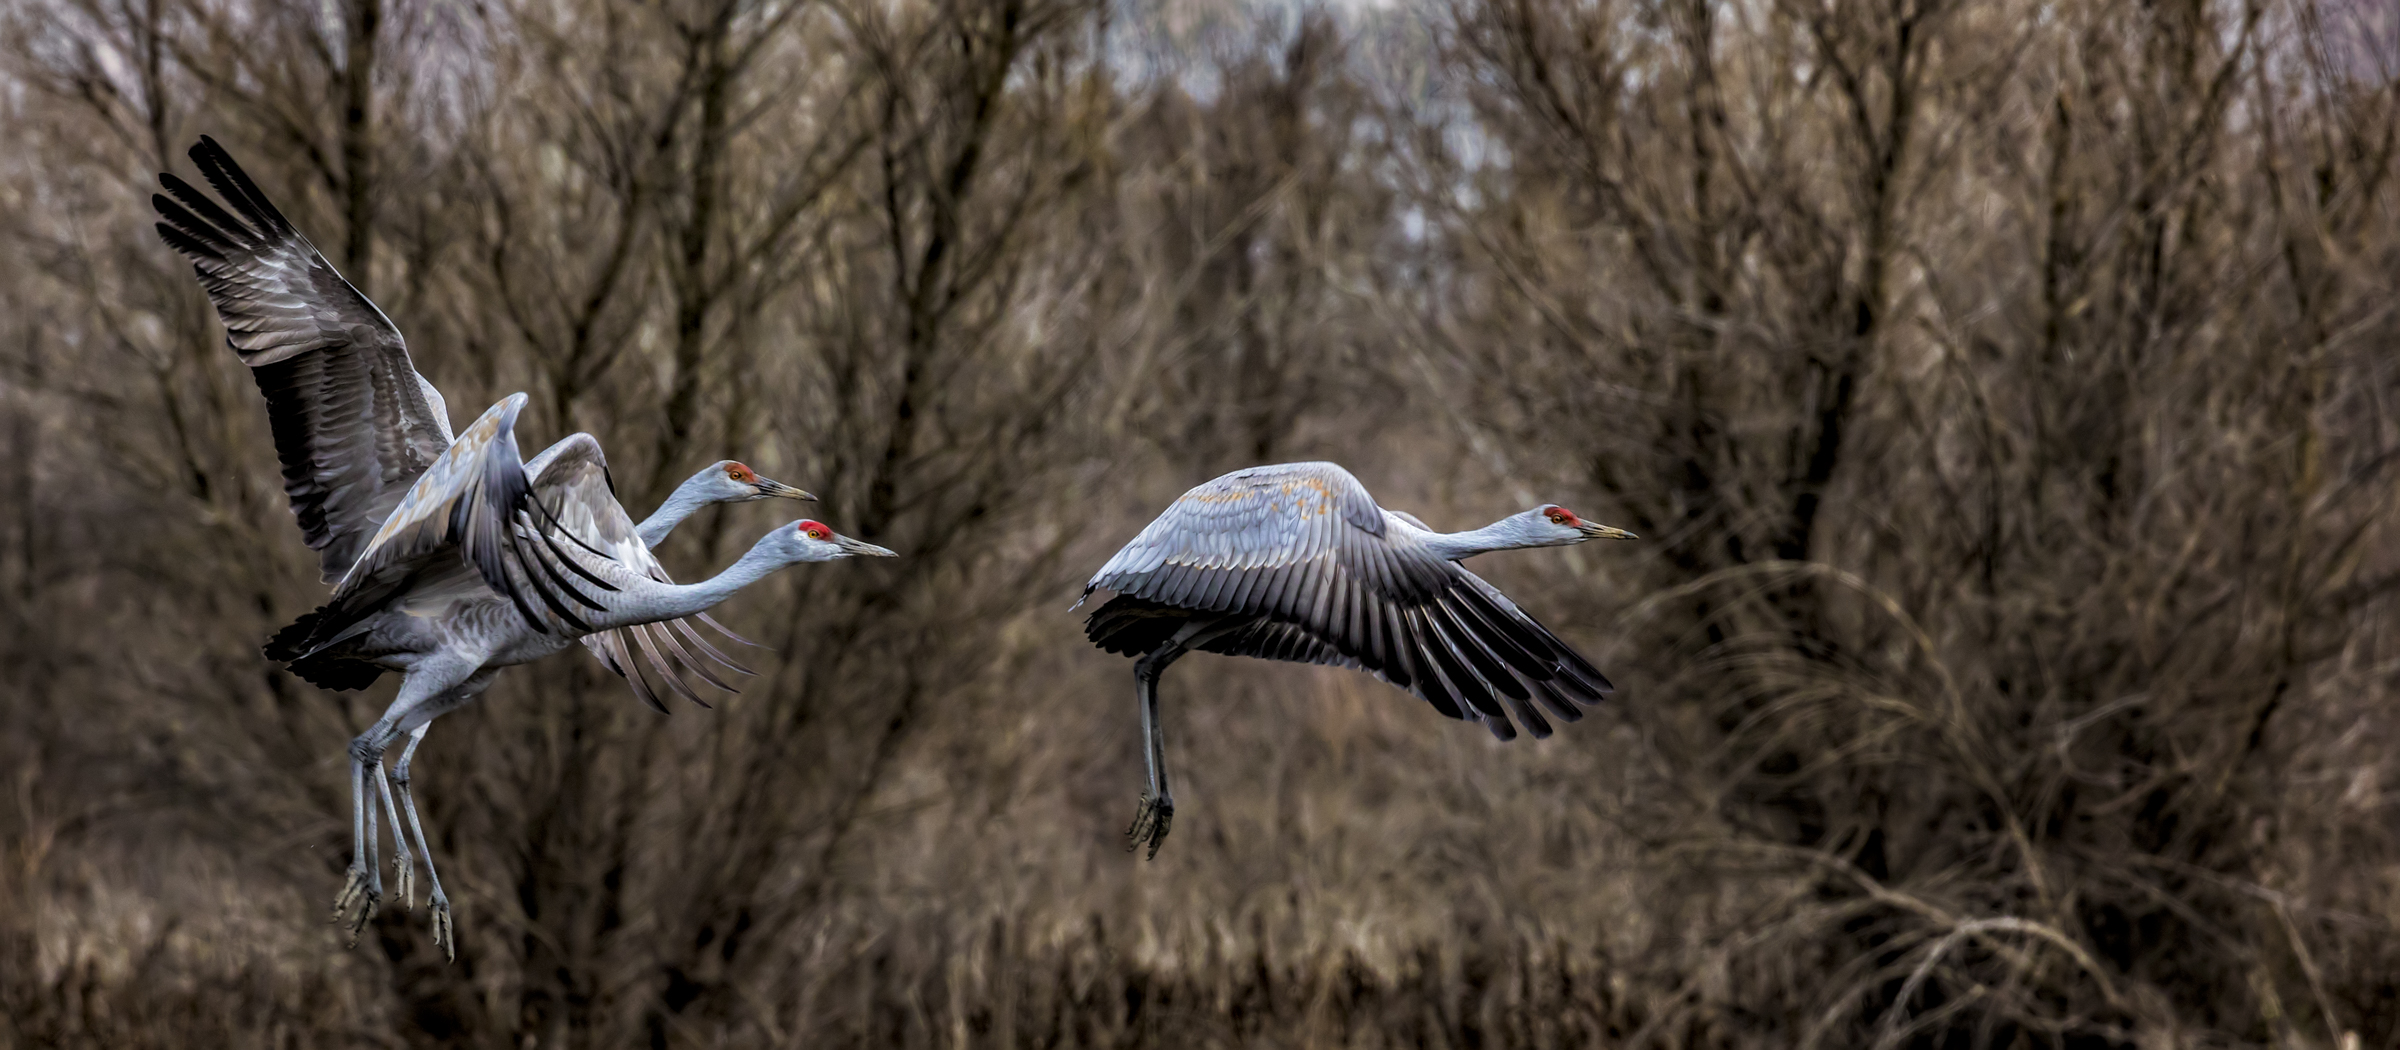 Sandhill Cranes usually fly in family groups. This family of Lesser Sandhill Cranes wintered at the San Joaquin River NWR.
Cano...